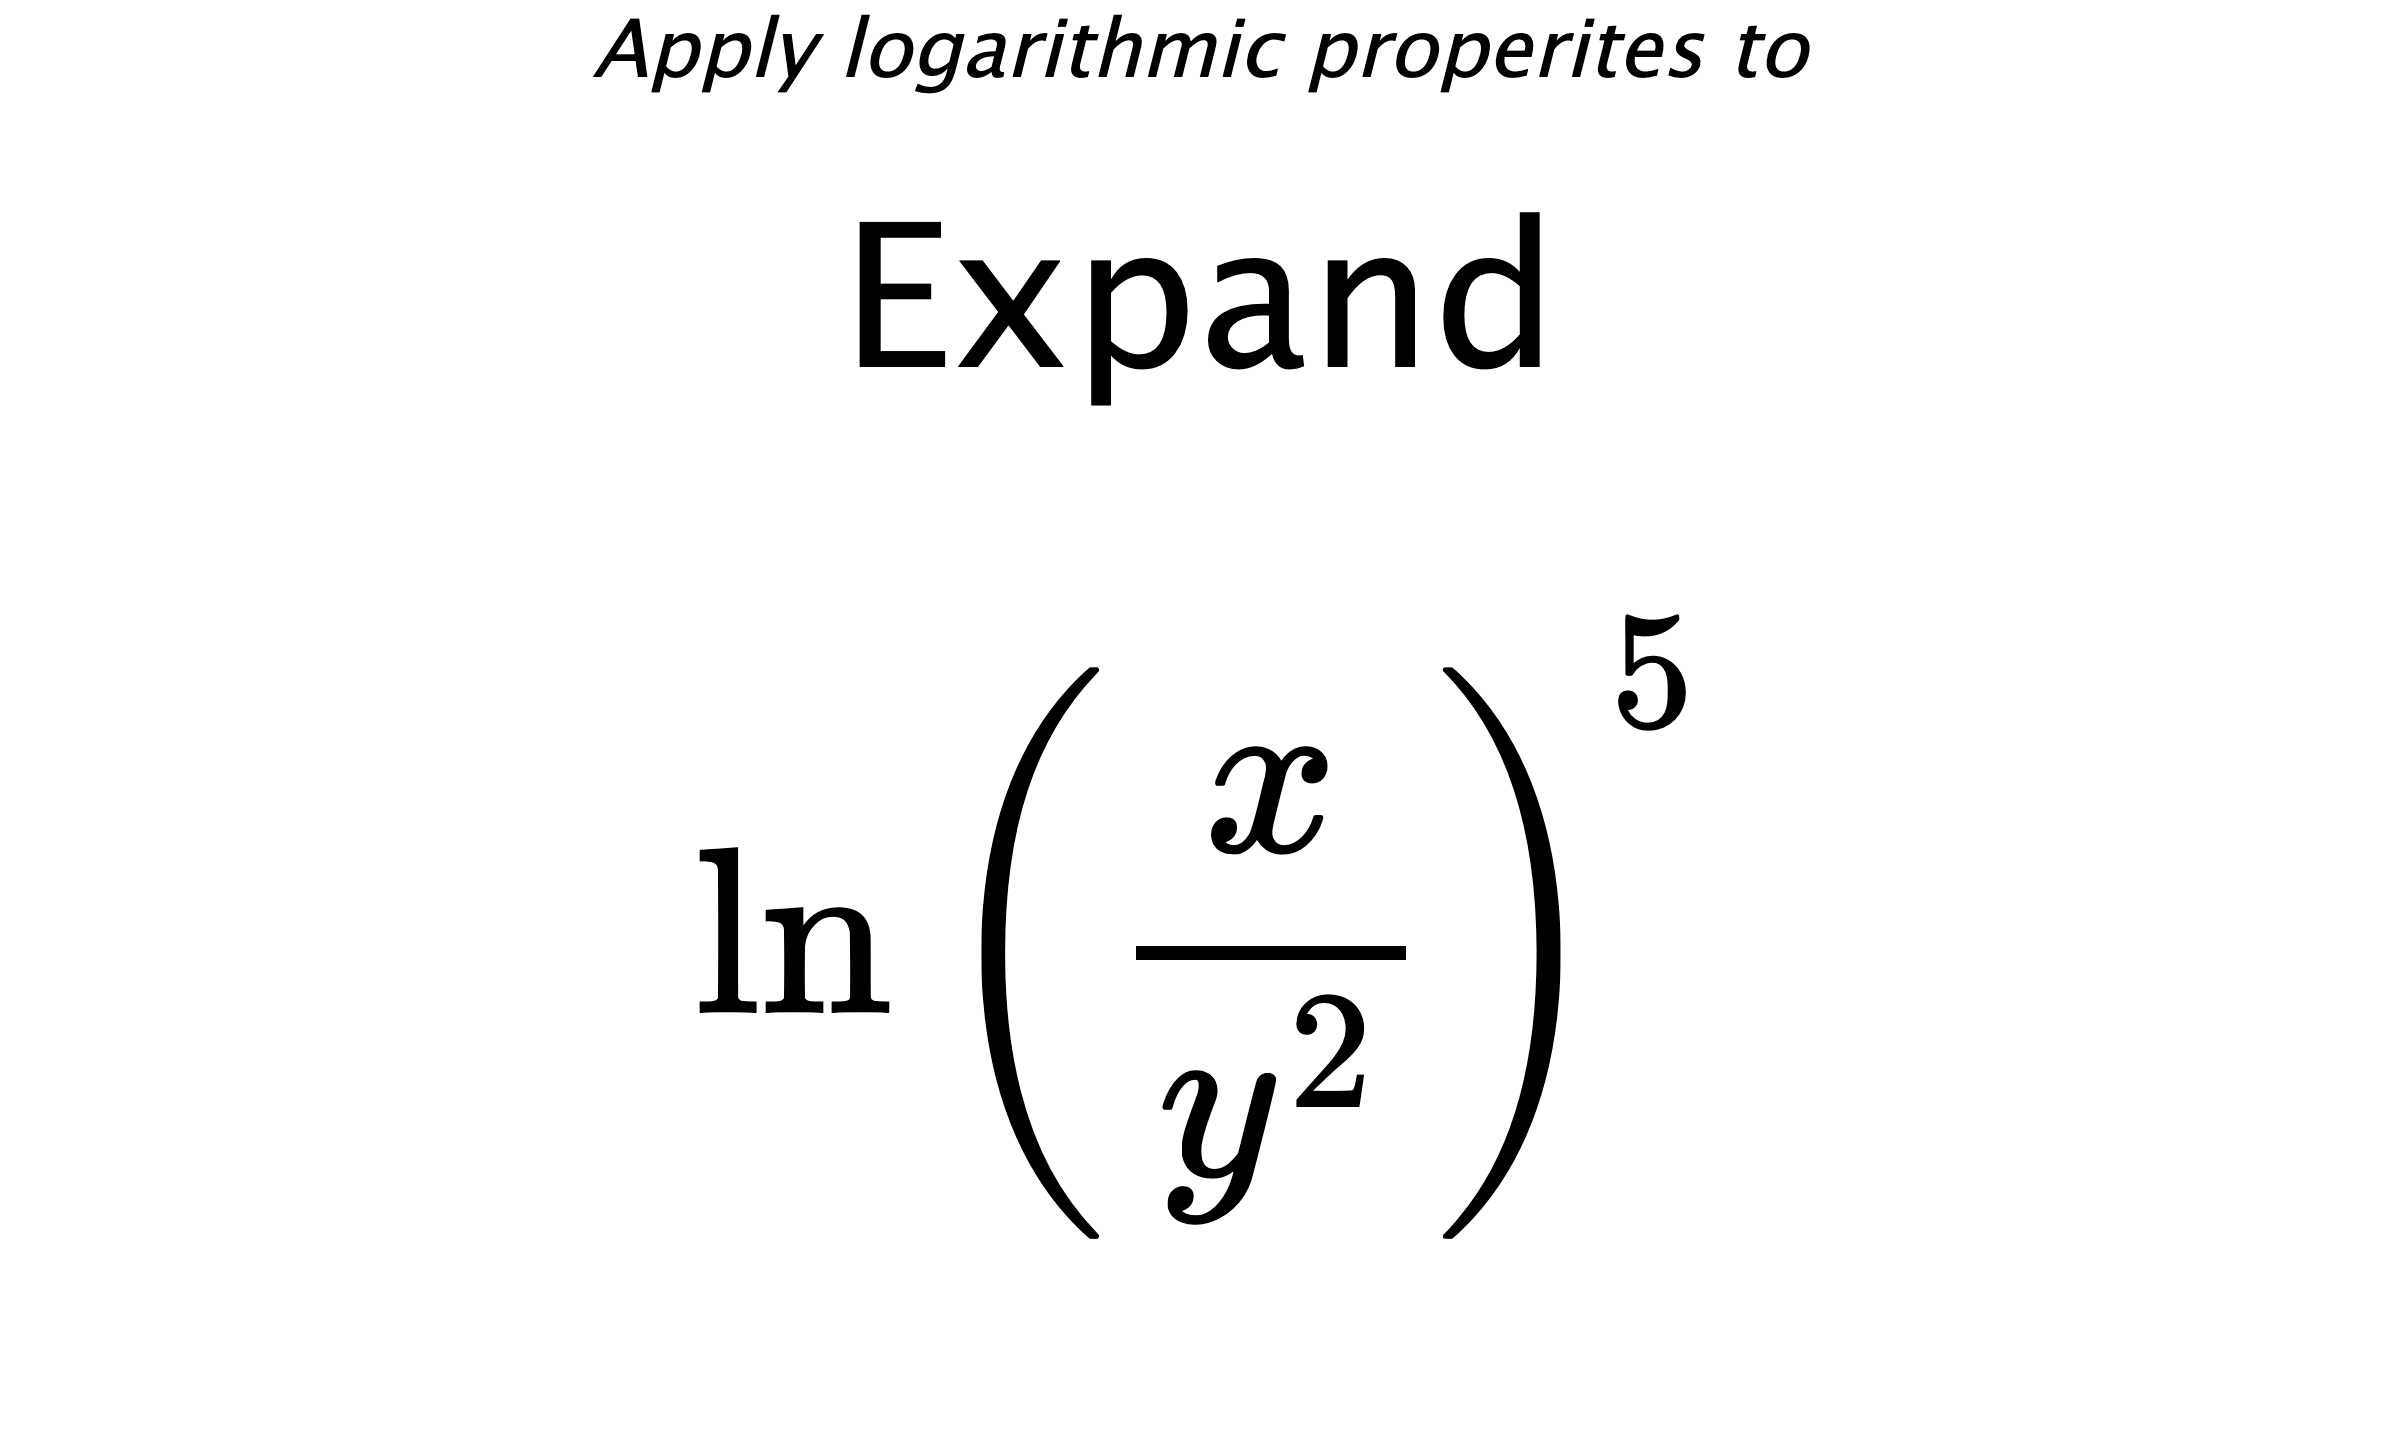 Apply logarithmic properites to Expand $$ \ln \left( \frac{x}{y^{2}} \right)^{5} $$